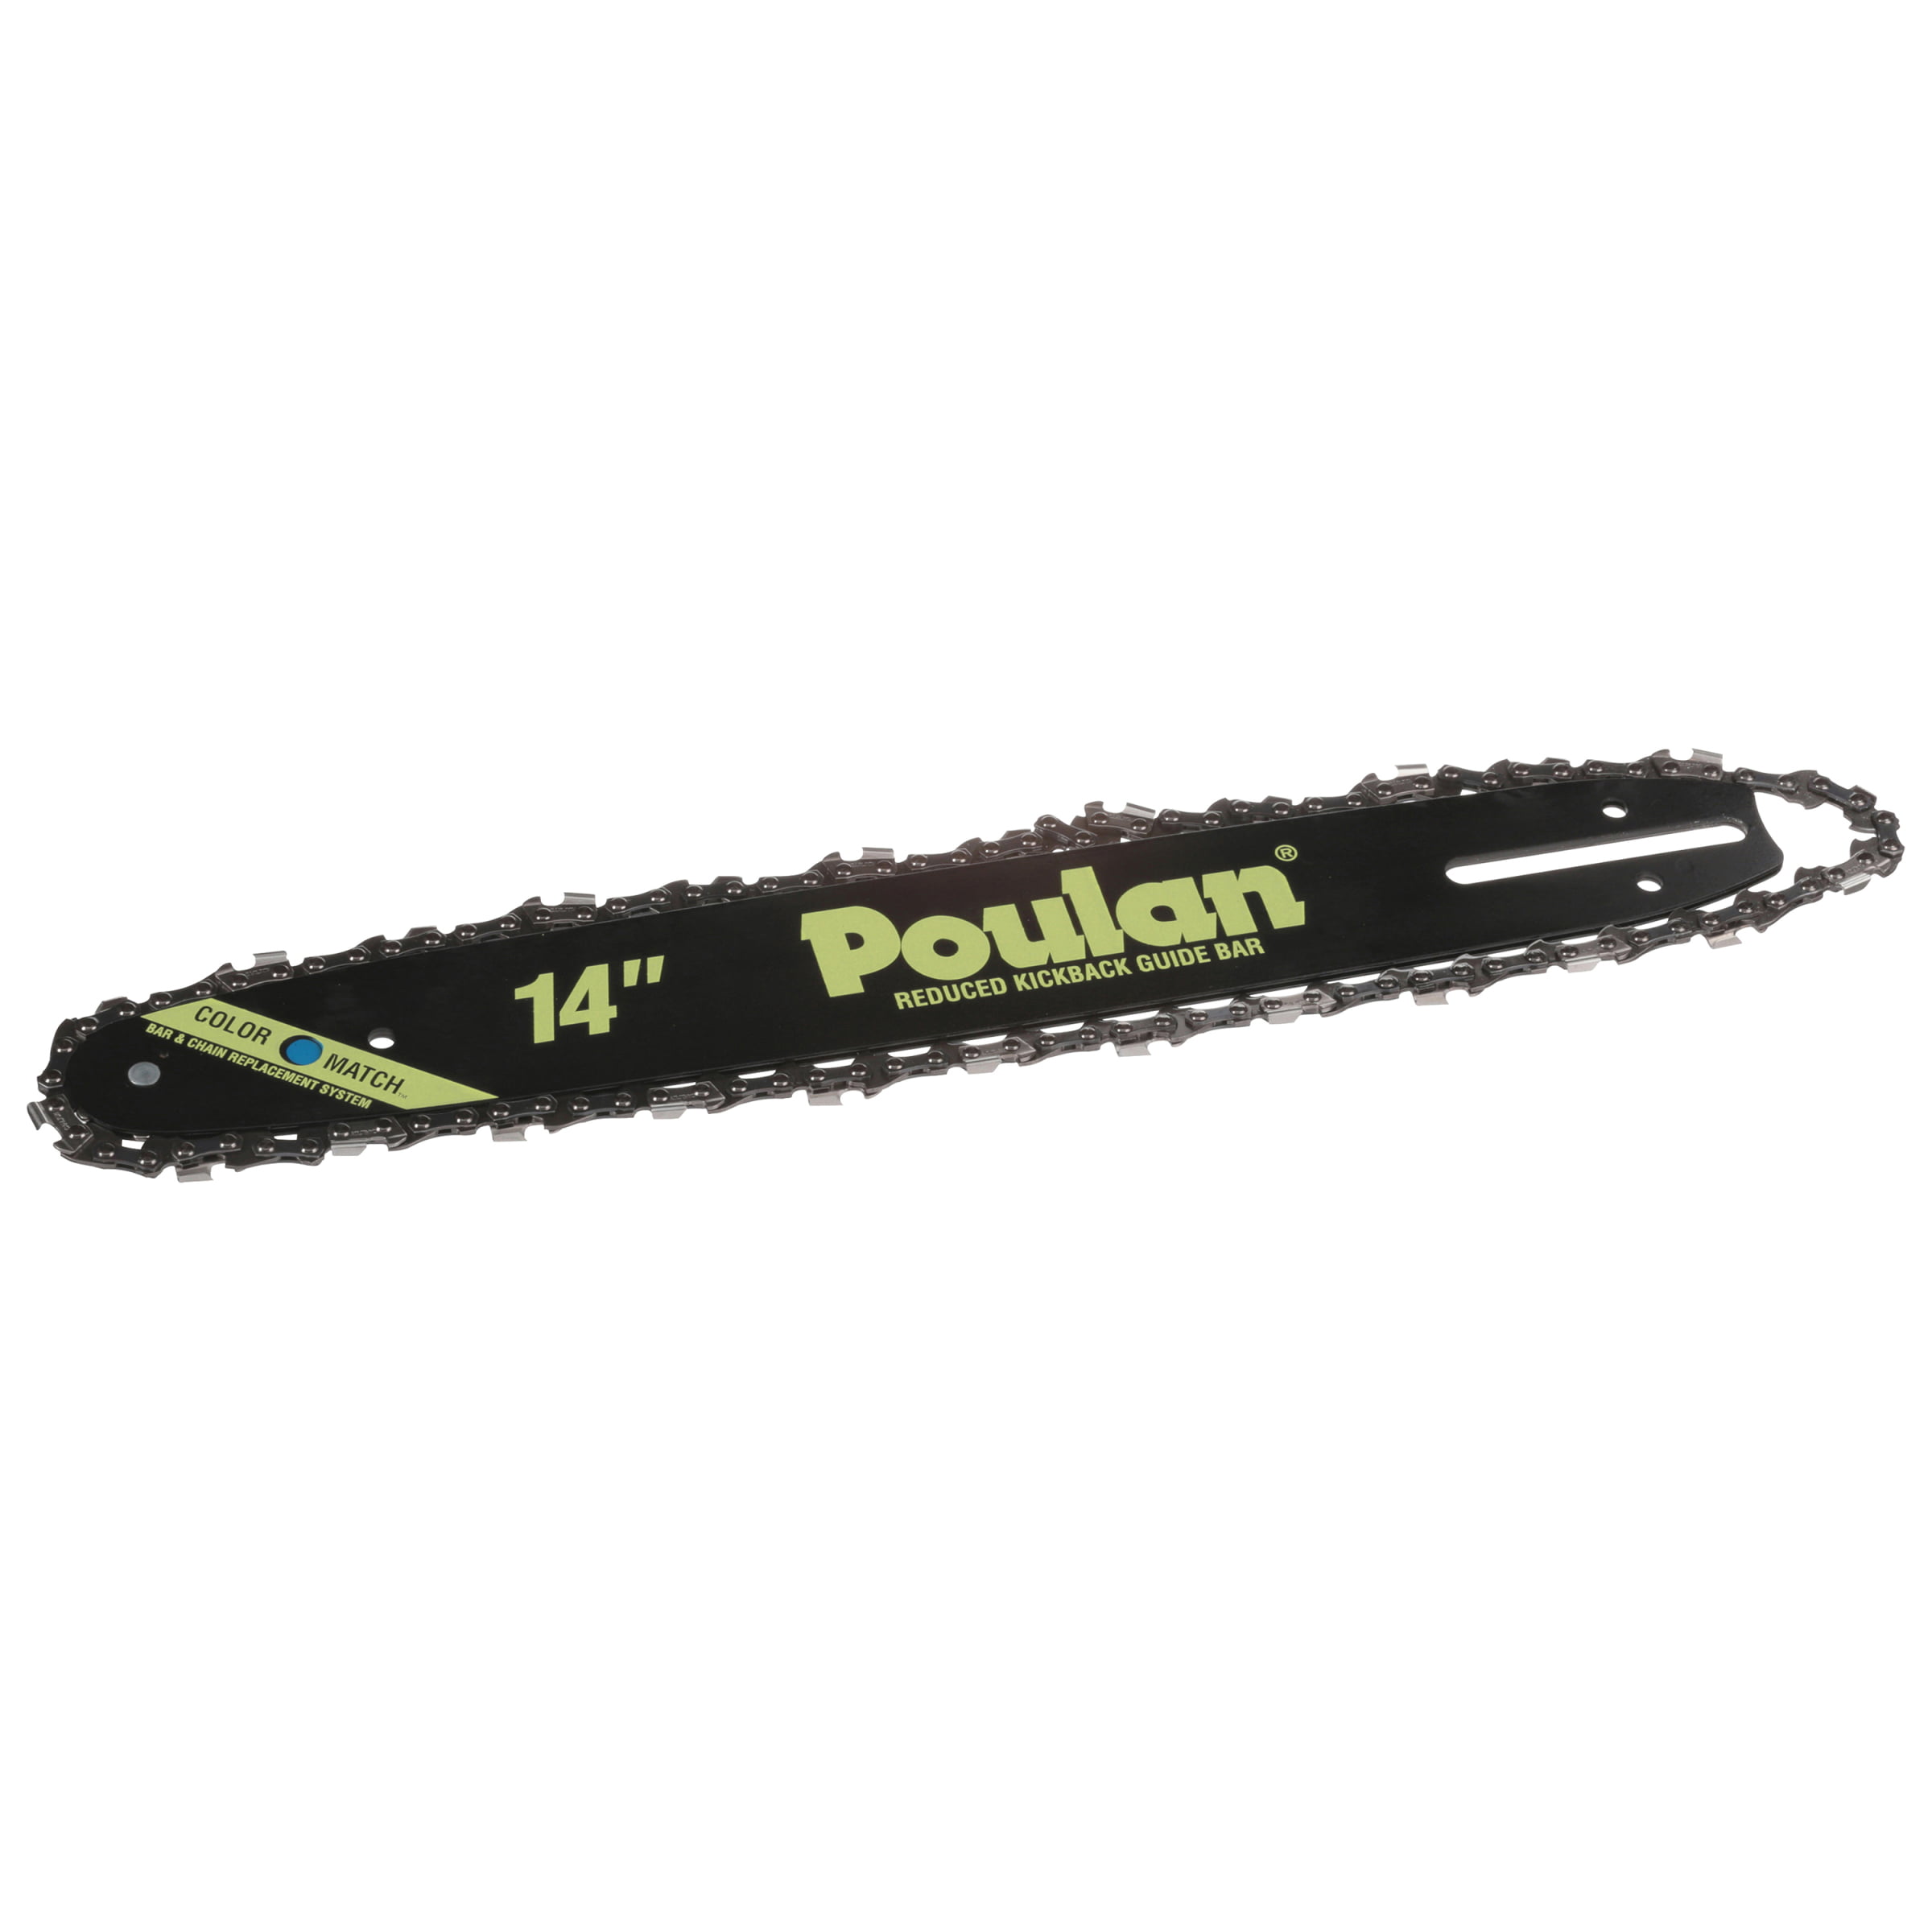 Poulan Pro 16" Bar and Chain Combination .50 Gauge W